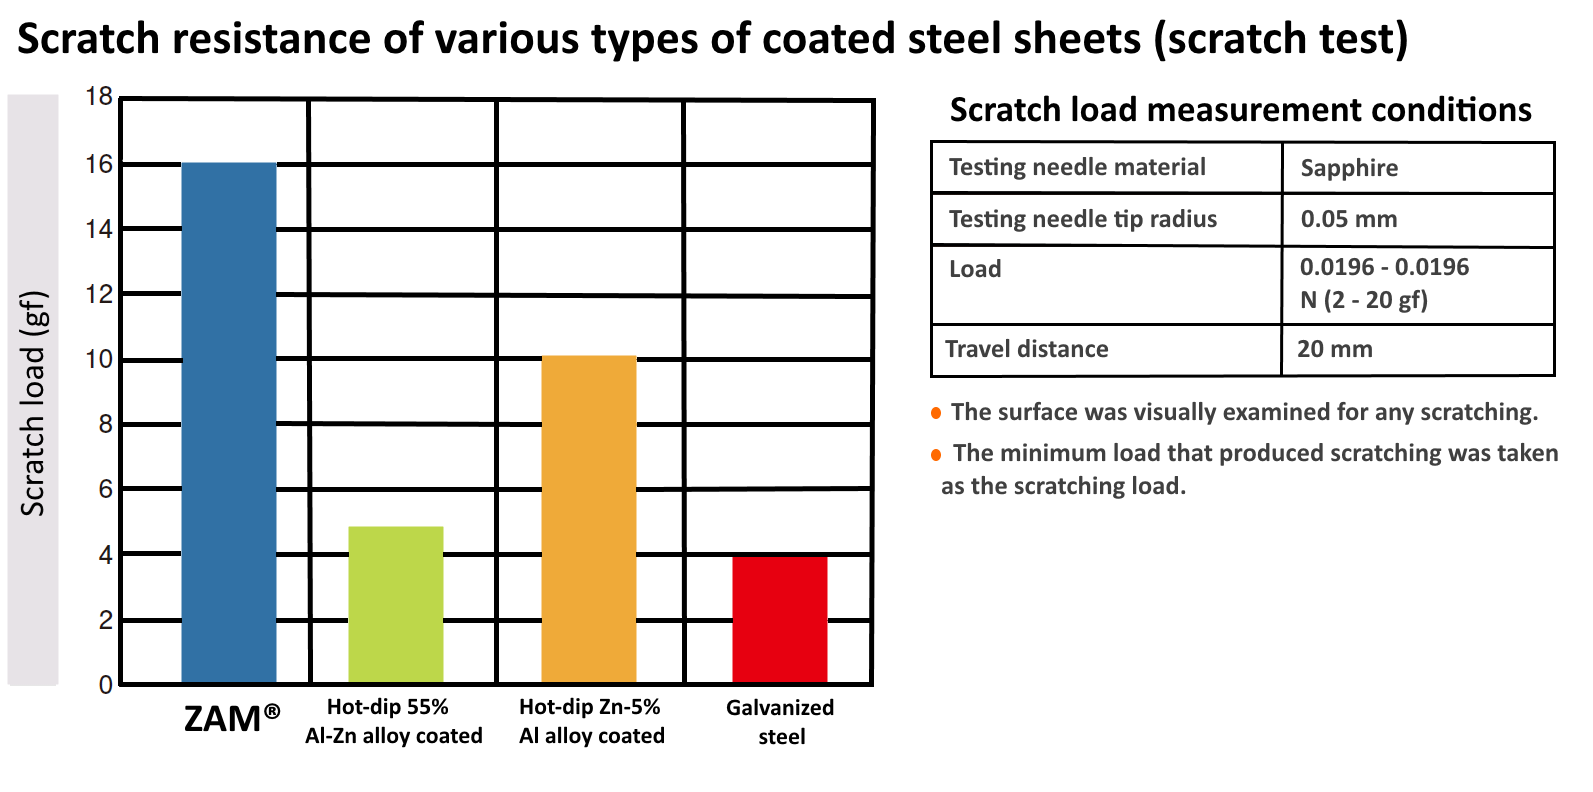 Graph showing scratch resistance of ZAM® vs. other types of coated steel in scratch test